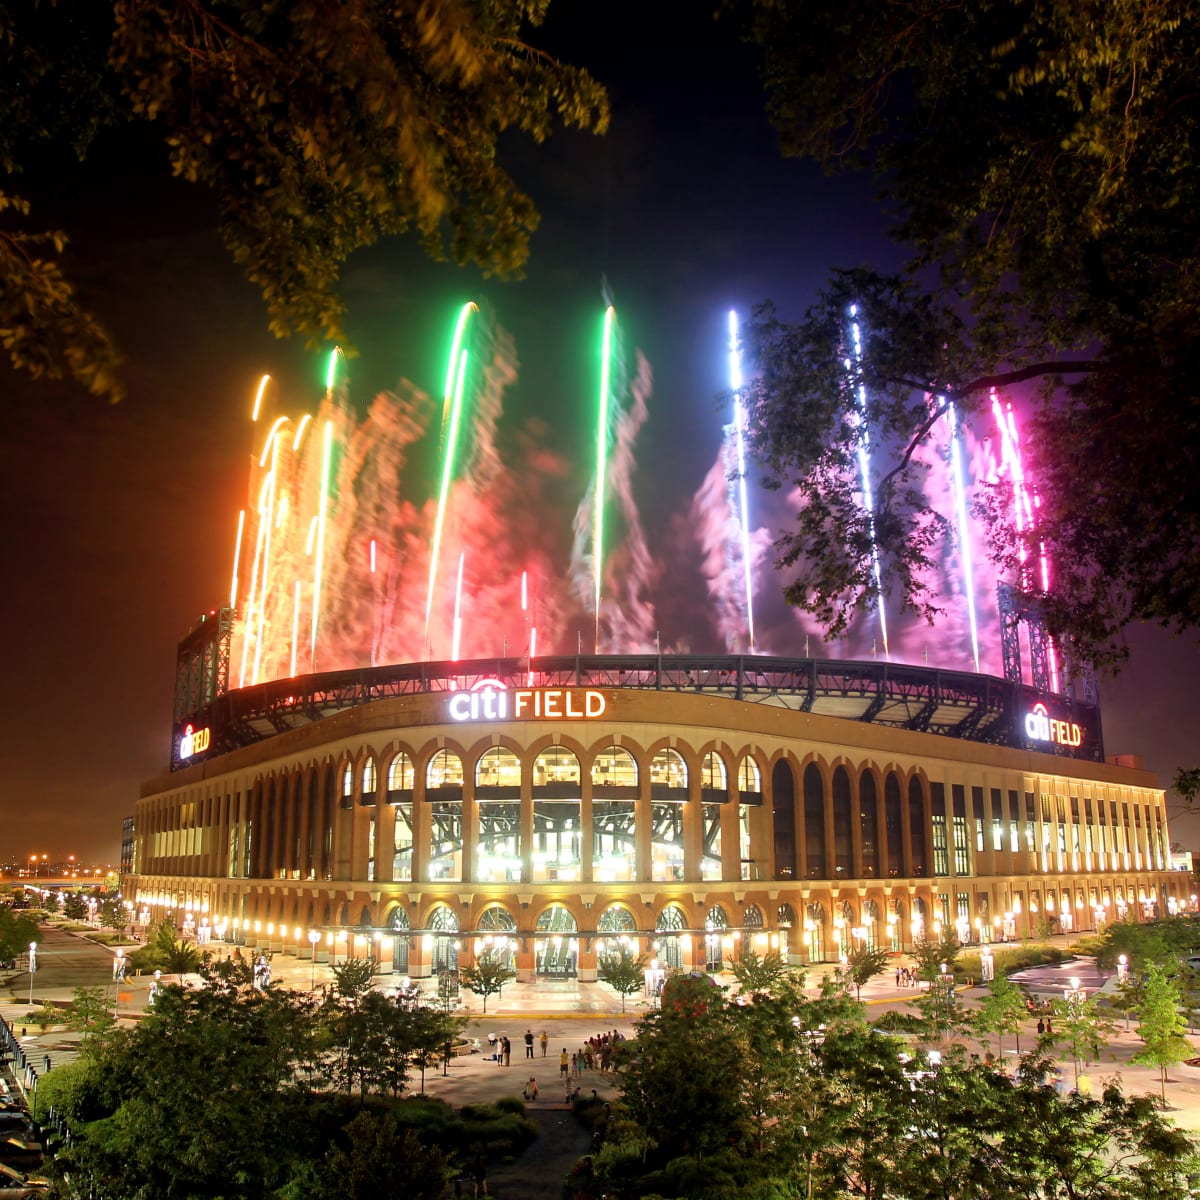 METS TO CELEBRATE PRIDE NIGHT AT CITI FIELD, by New York Mets